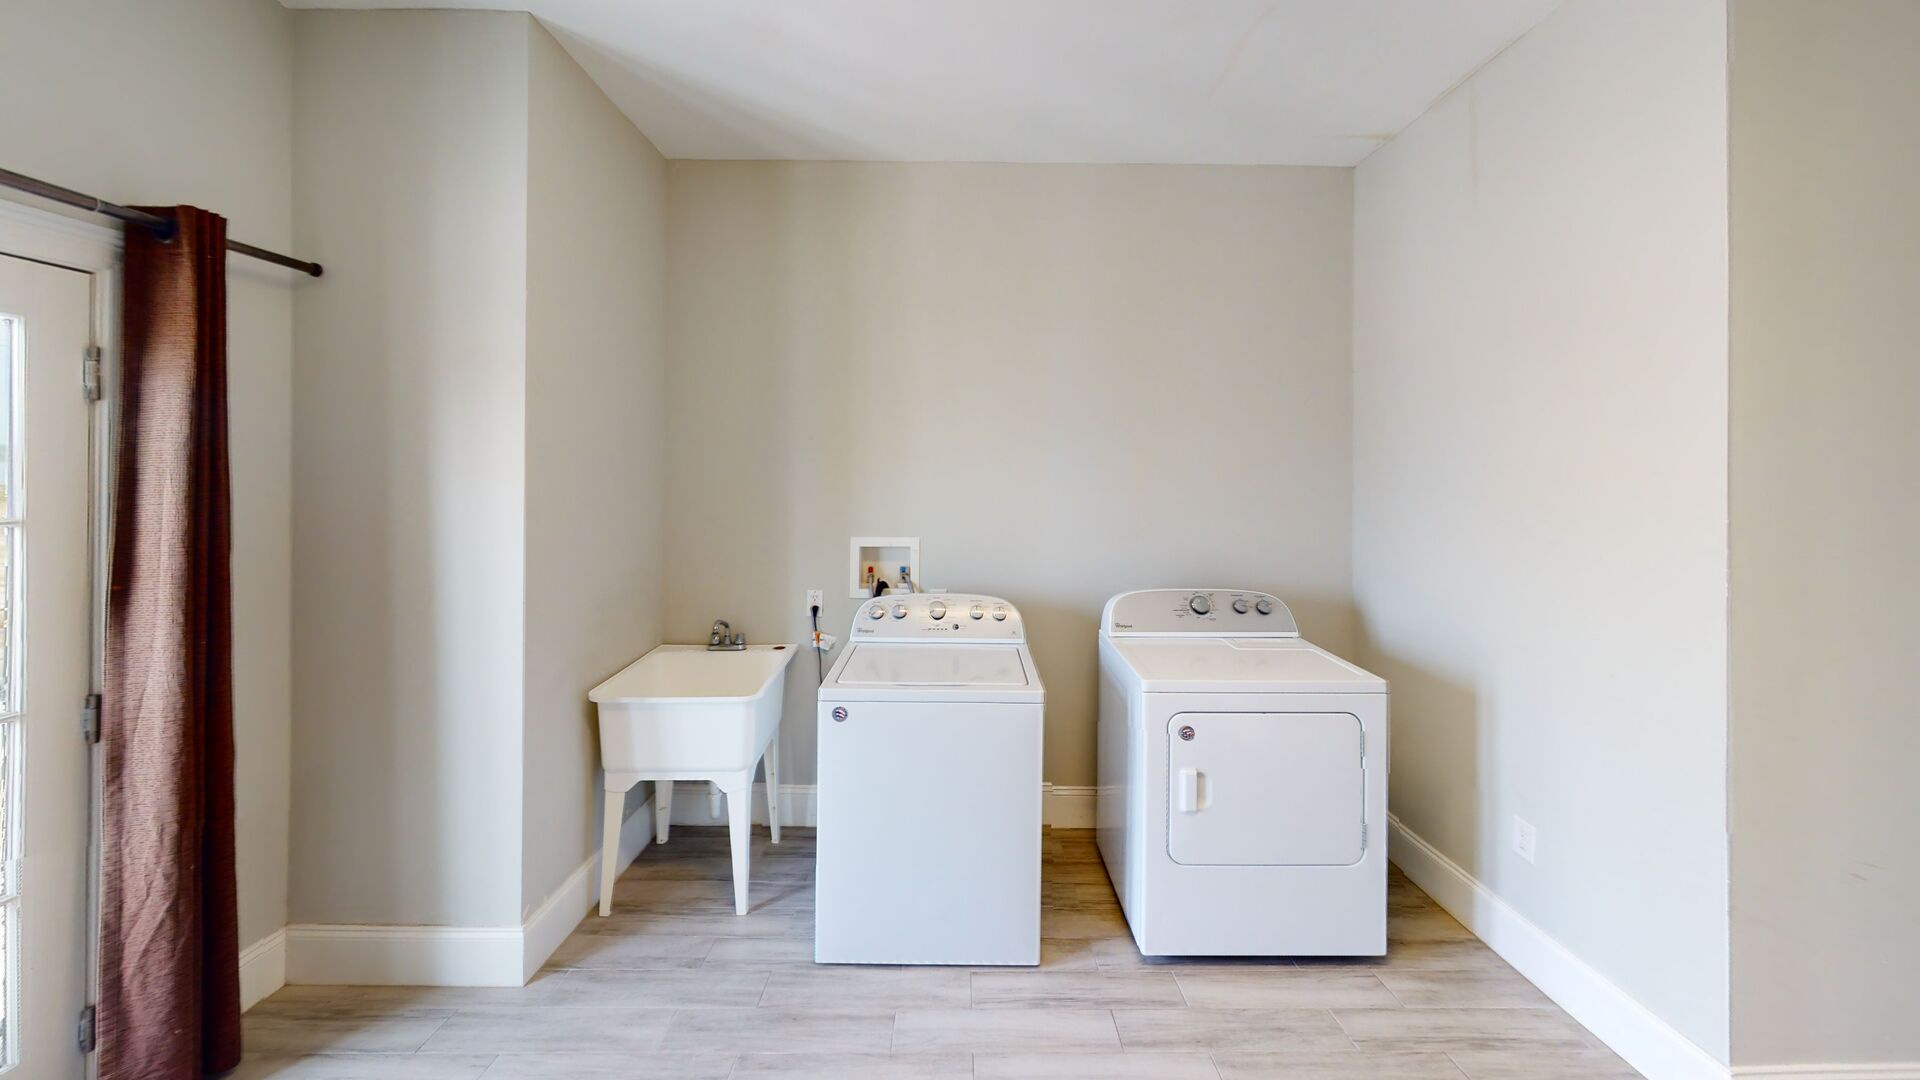 Full size washer dryer and laundry sink